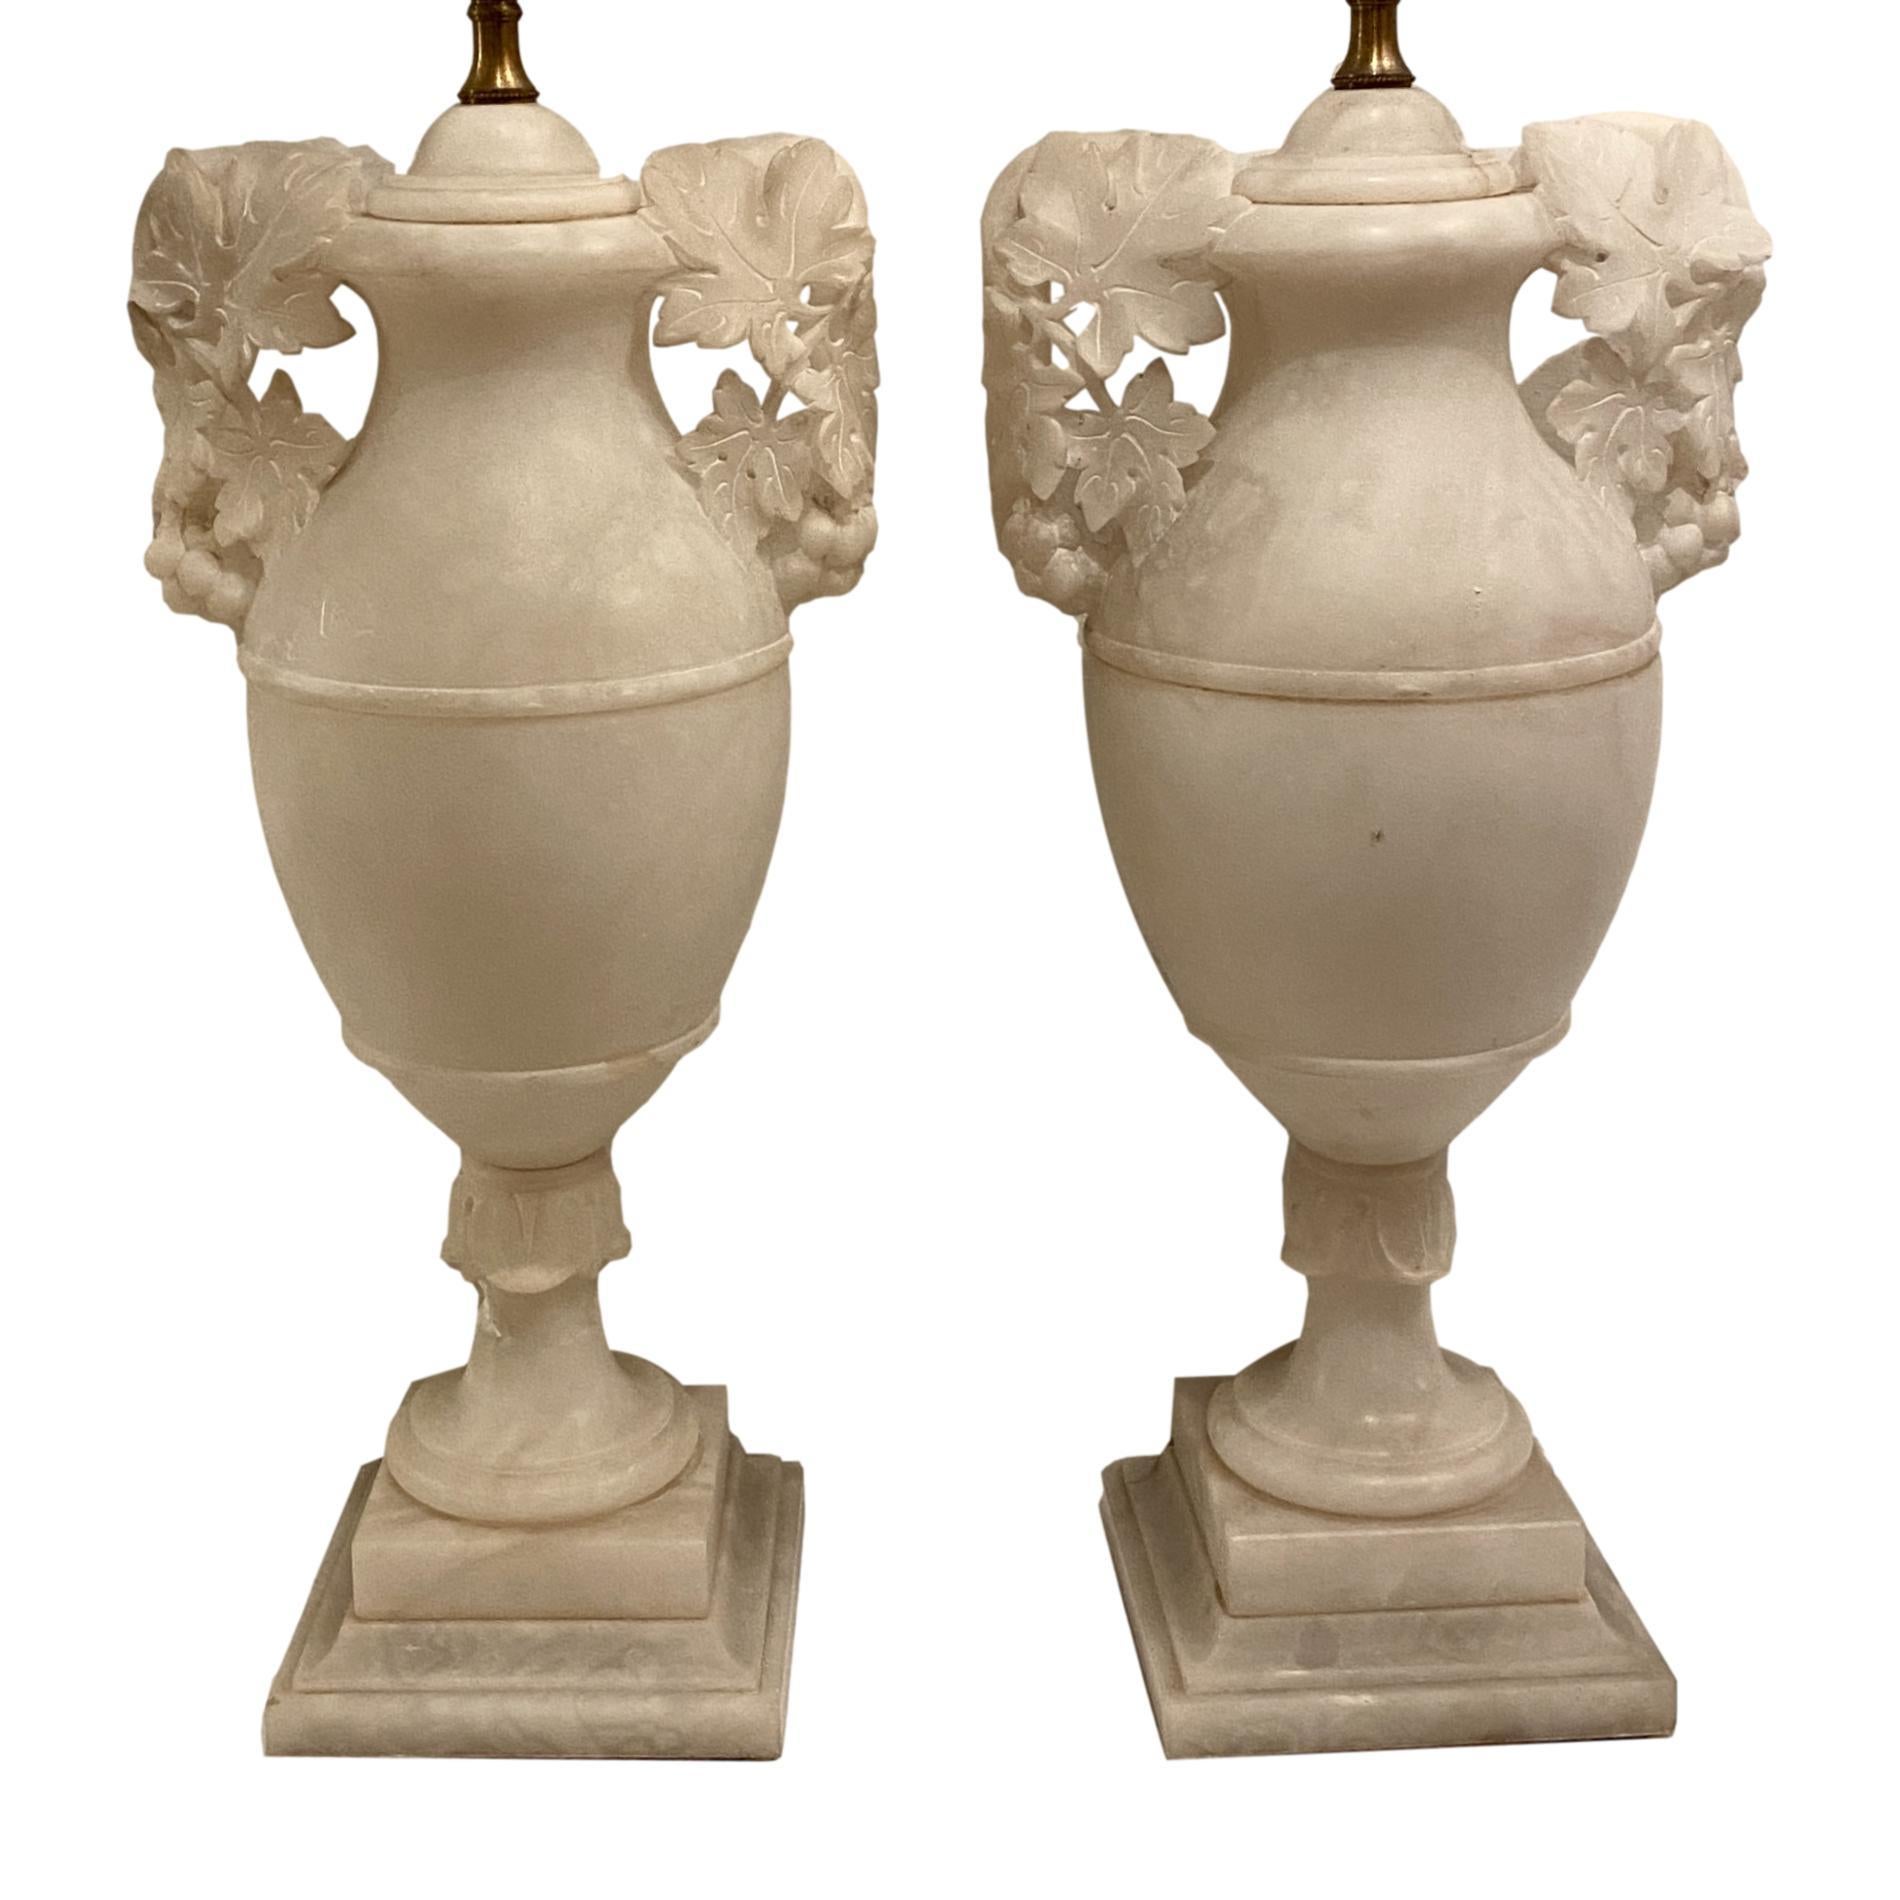 Pair of circa 1920's French carved alabaster table lamps with foliage motif open-work carved handles.

Measurements:
Height of body: 18